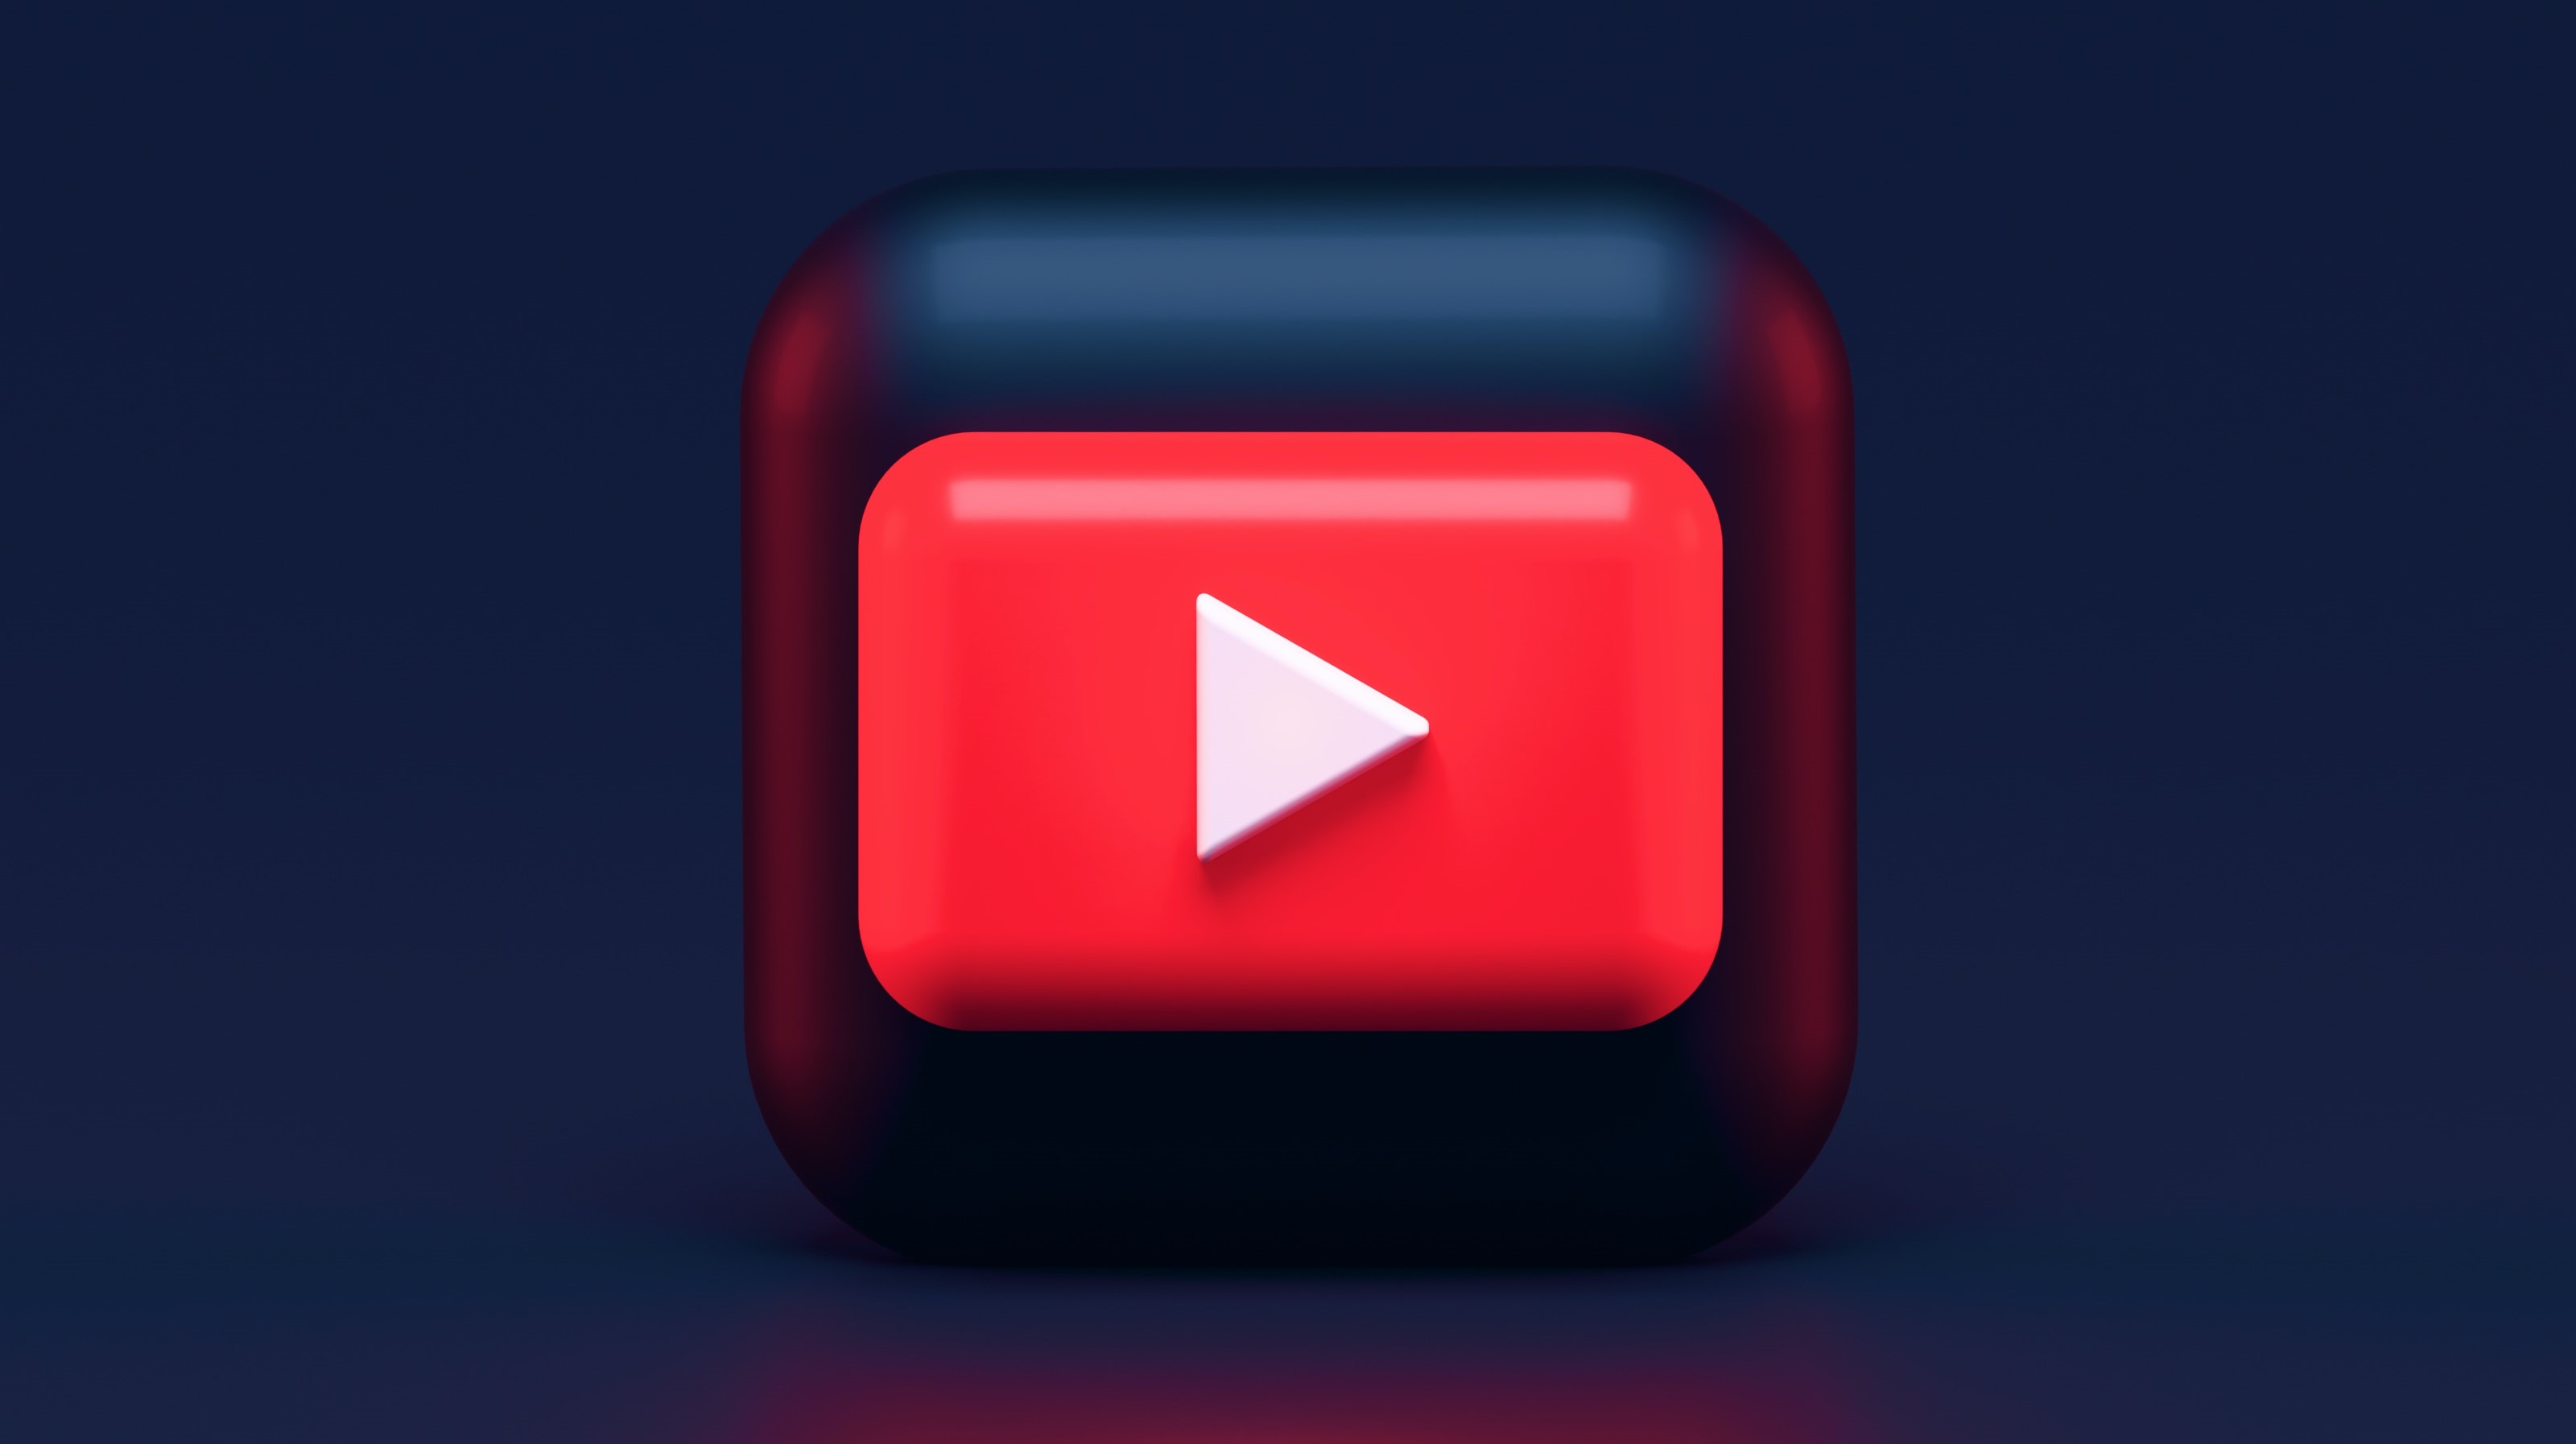 Youtube 3d logo with dark blue background and a black 3d based with a low light on it.